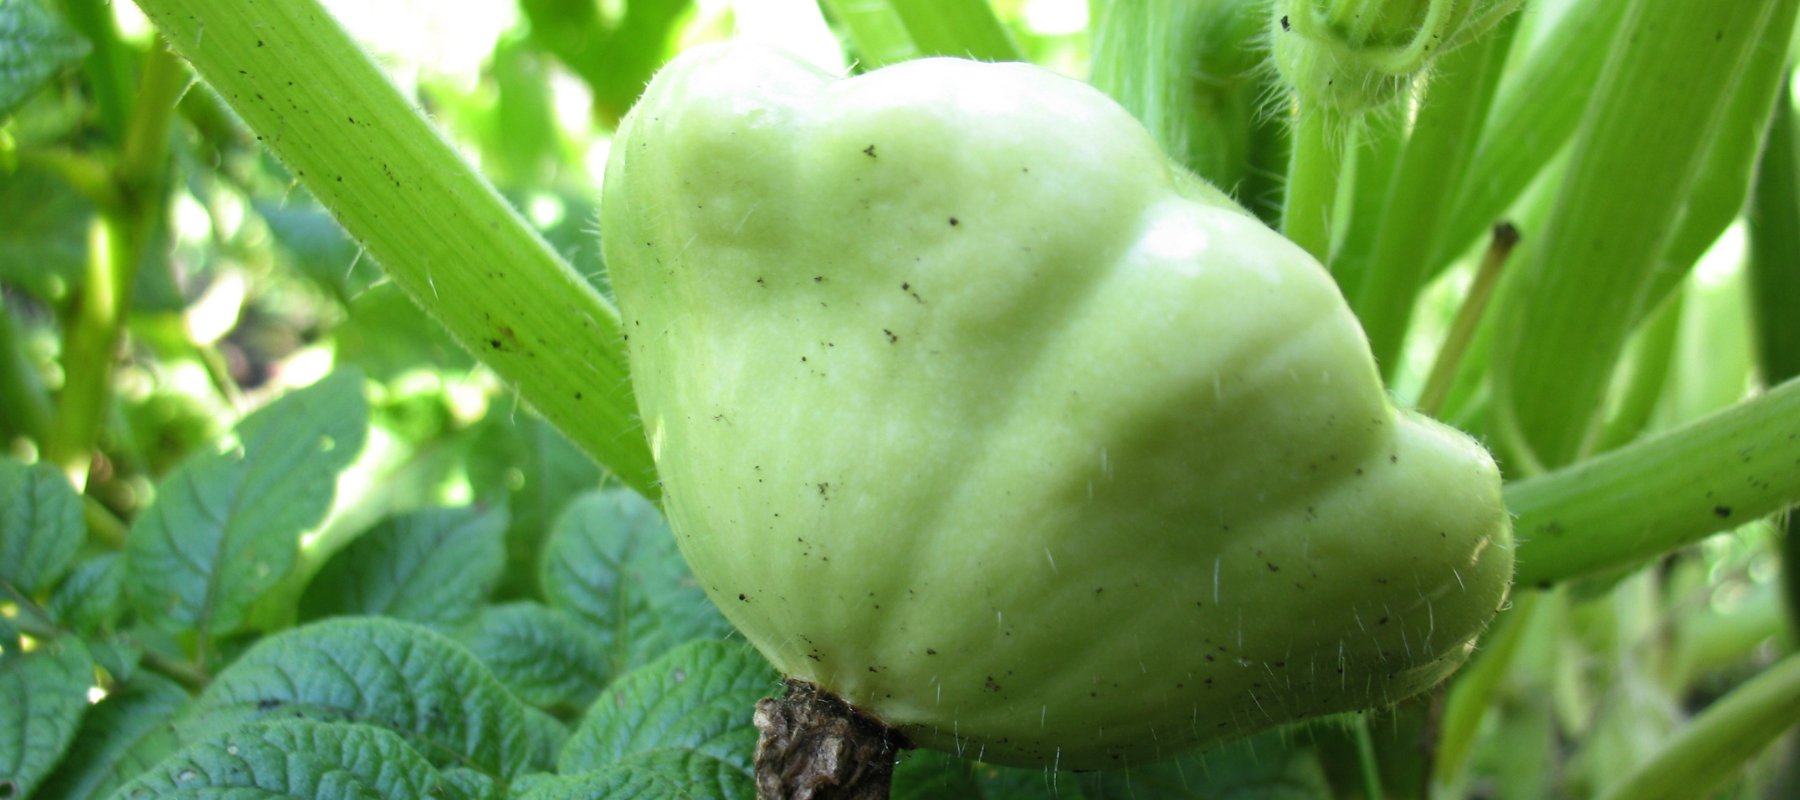 How to Grow Squash